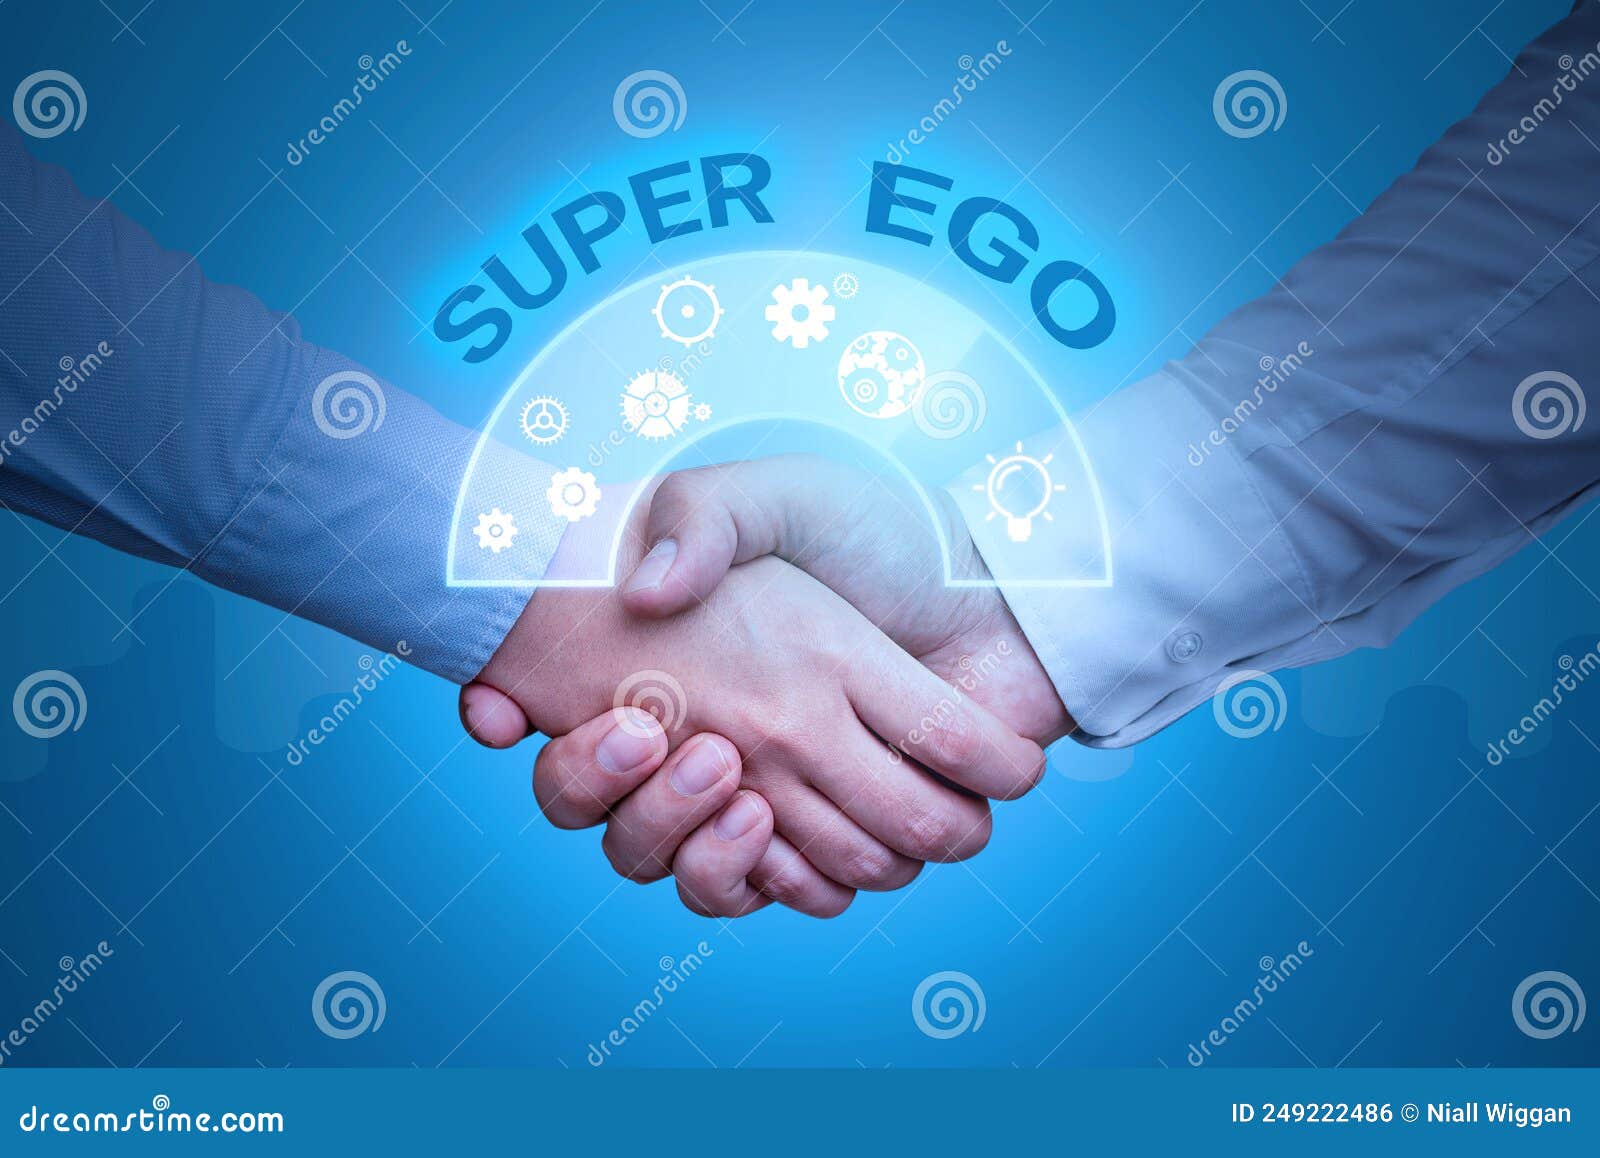 Writing Displaying Text Super Ego. Concept Meaning the I or Self of Any  Person that is Empowering His Whole Soul Hands Stock Photo - Image of cool,  great: 249222486